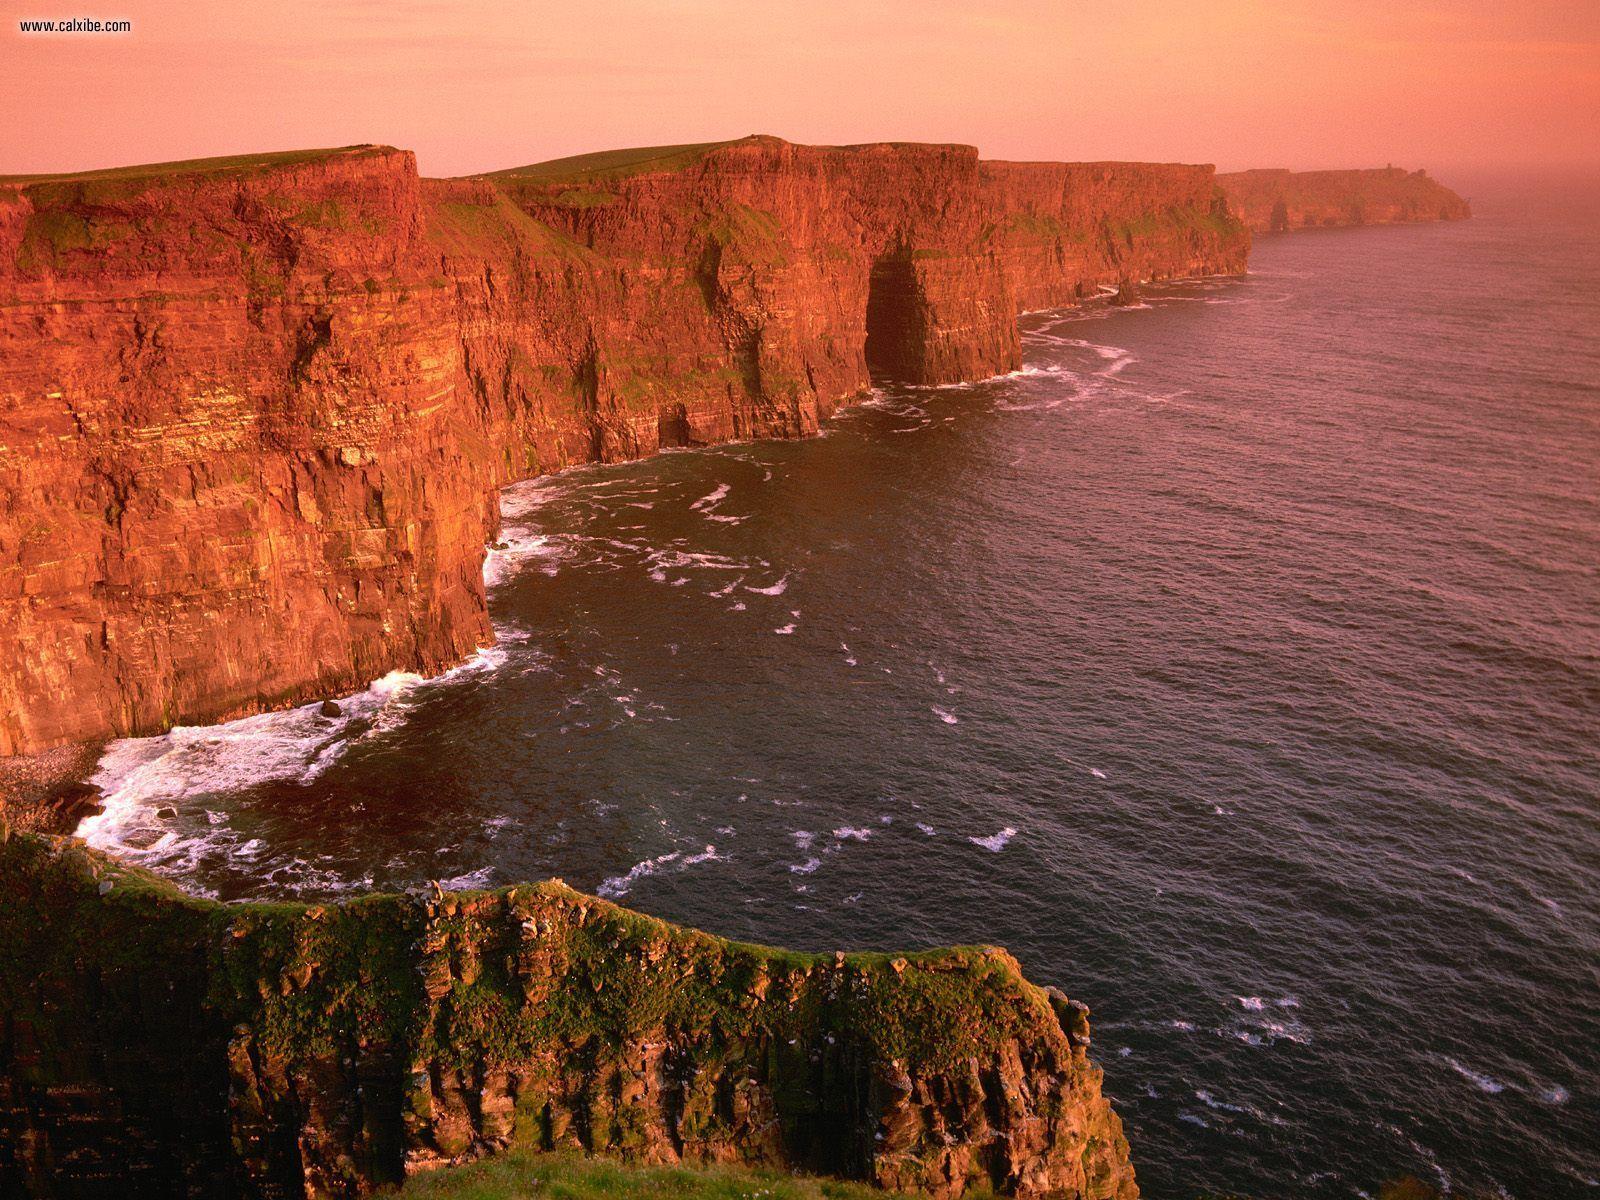 Nature: Cliffs Of Moher County Clare Ireland, picture nr. 19733